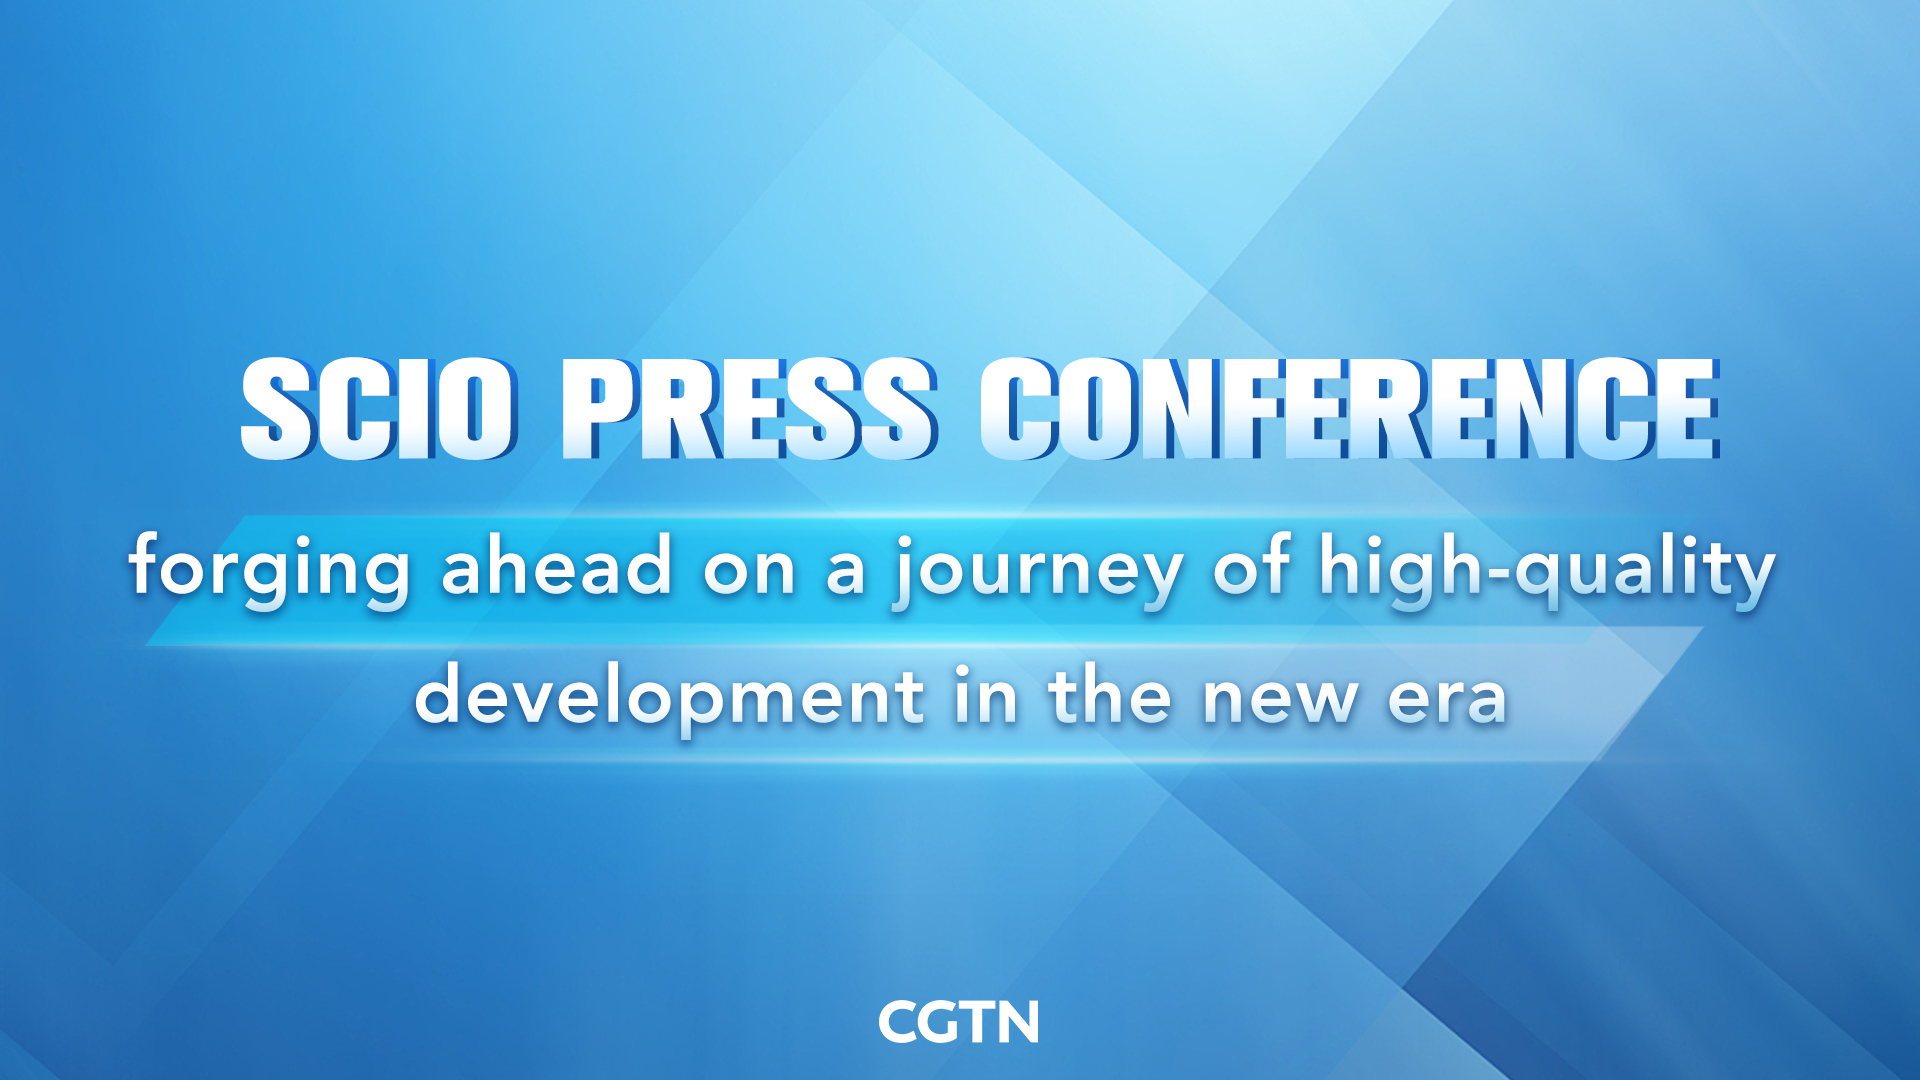 Live: Briefing on forging ahead on a journey of high-quality development in the new era